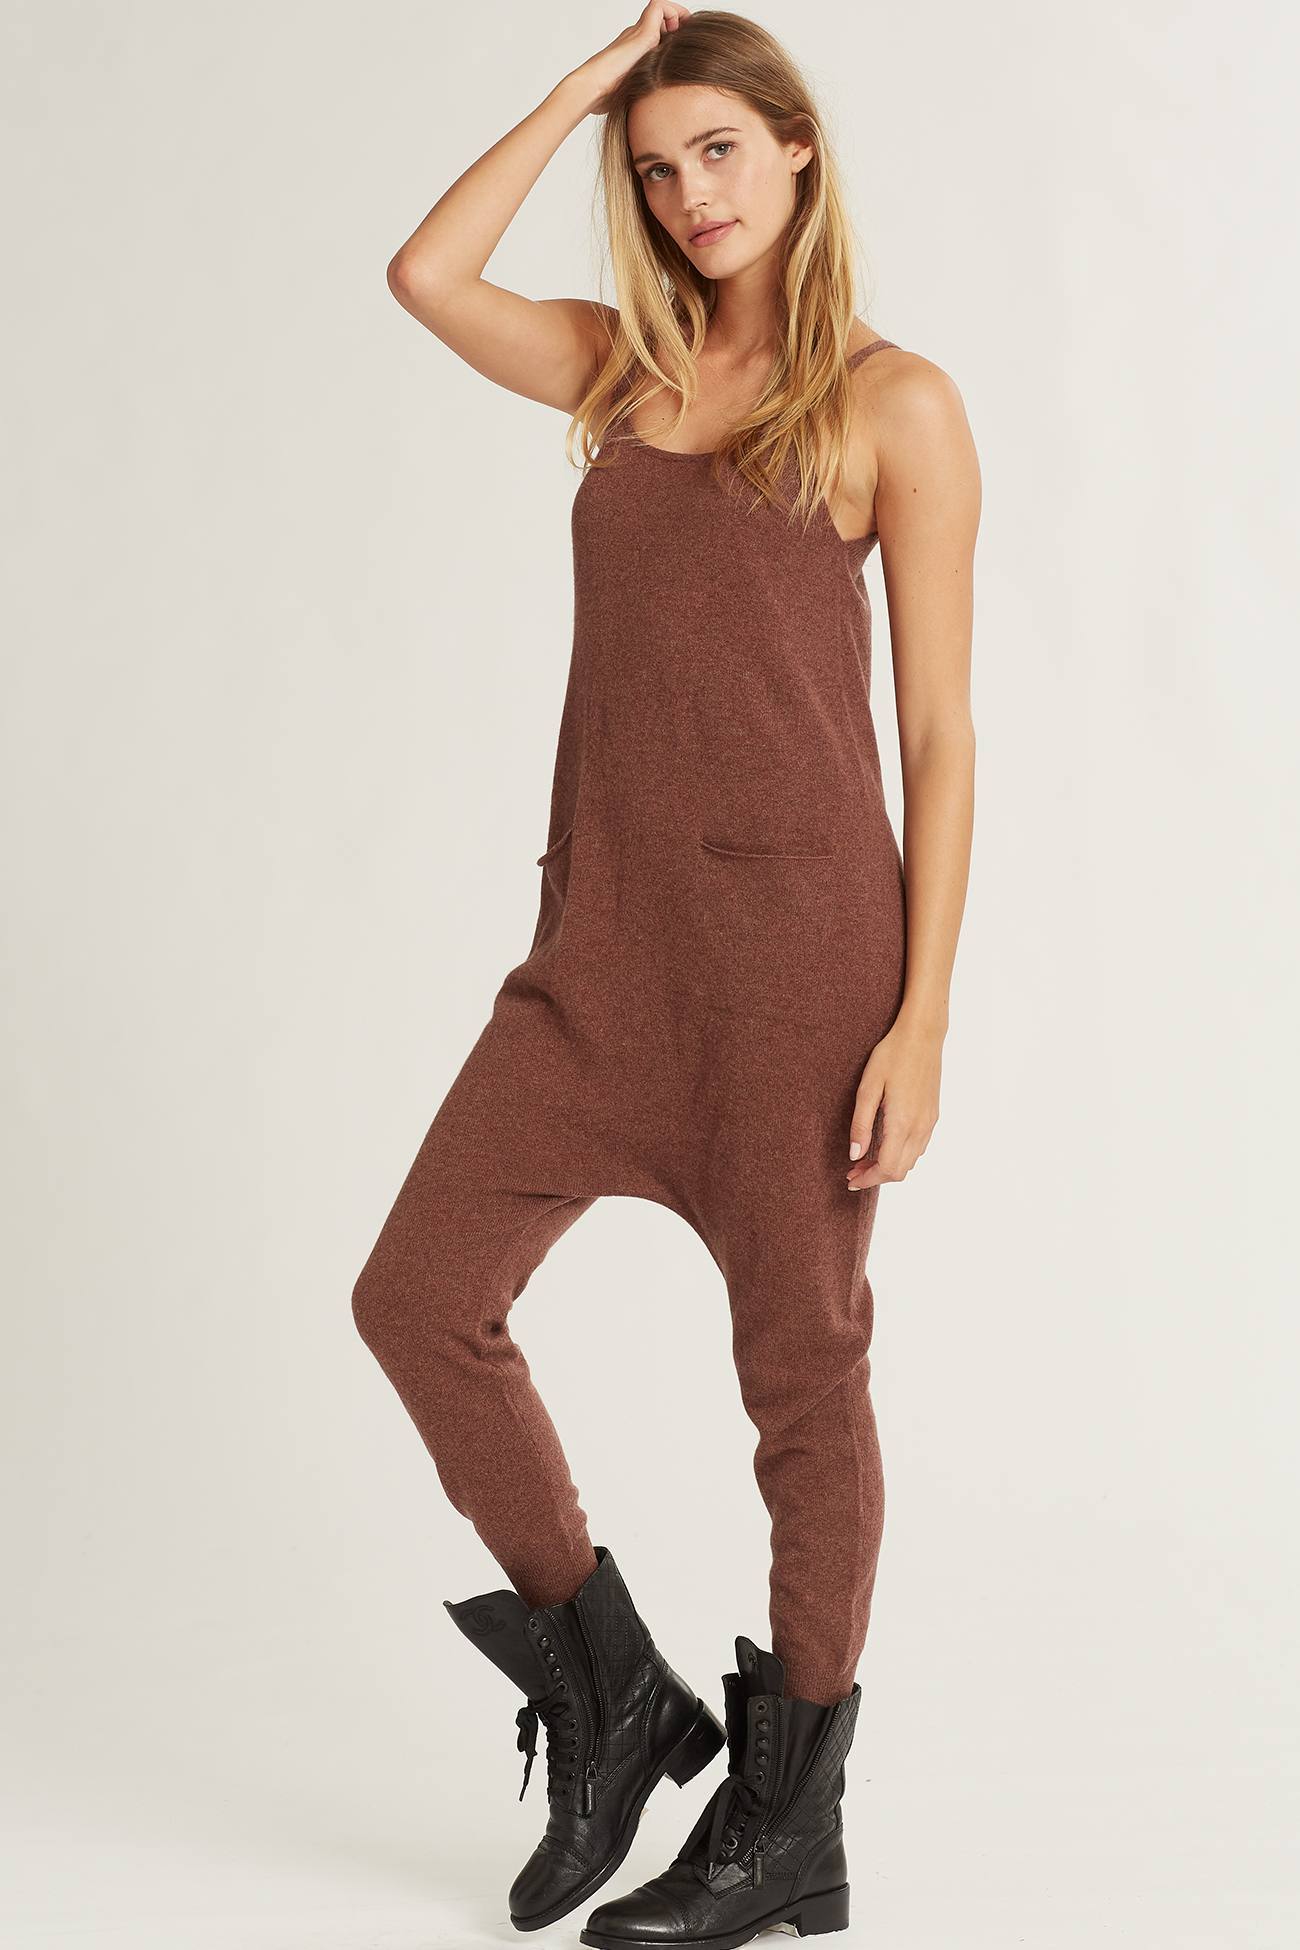 Naked Cashmere Adult Onesie